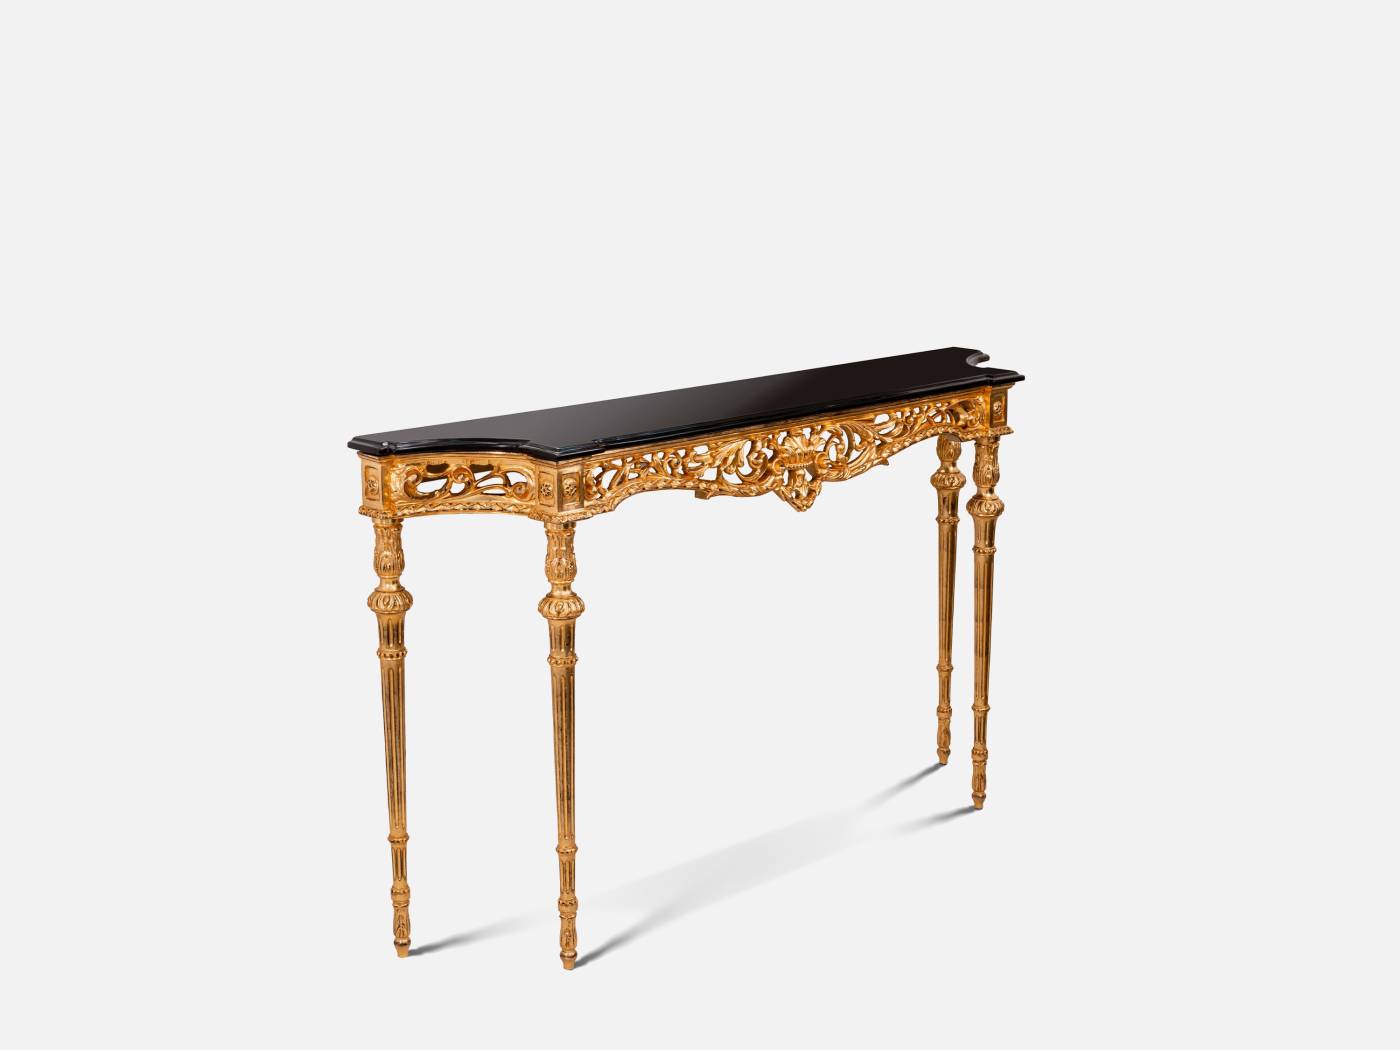 ART. 2317 - C.G. Capelletti quality furniture and timeless elegance with luxury made in italy contemporary Console.